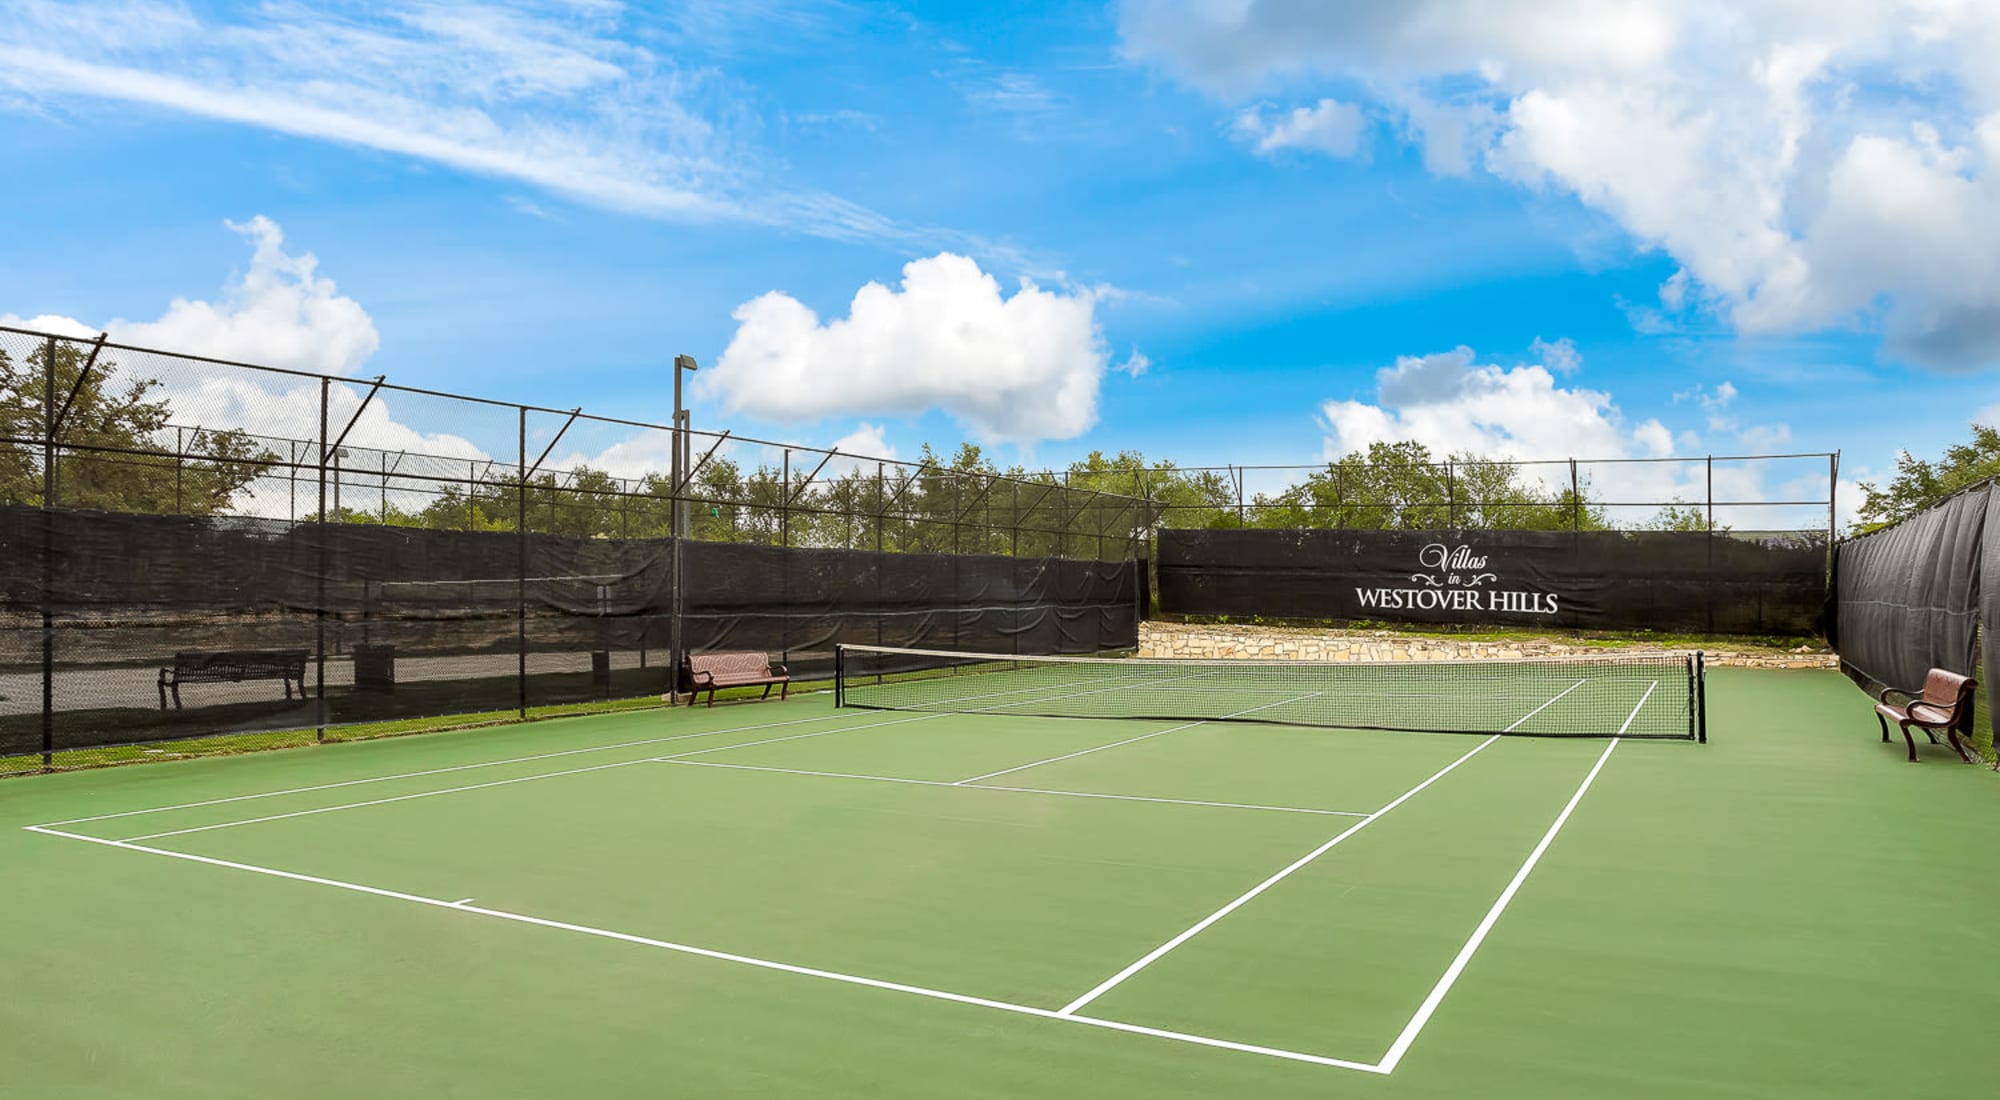 Lighted Tennis Court at Villas in Westover Hills